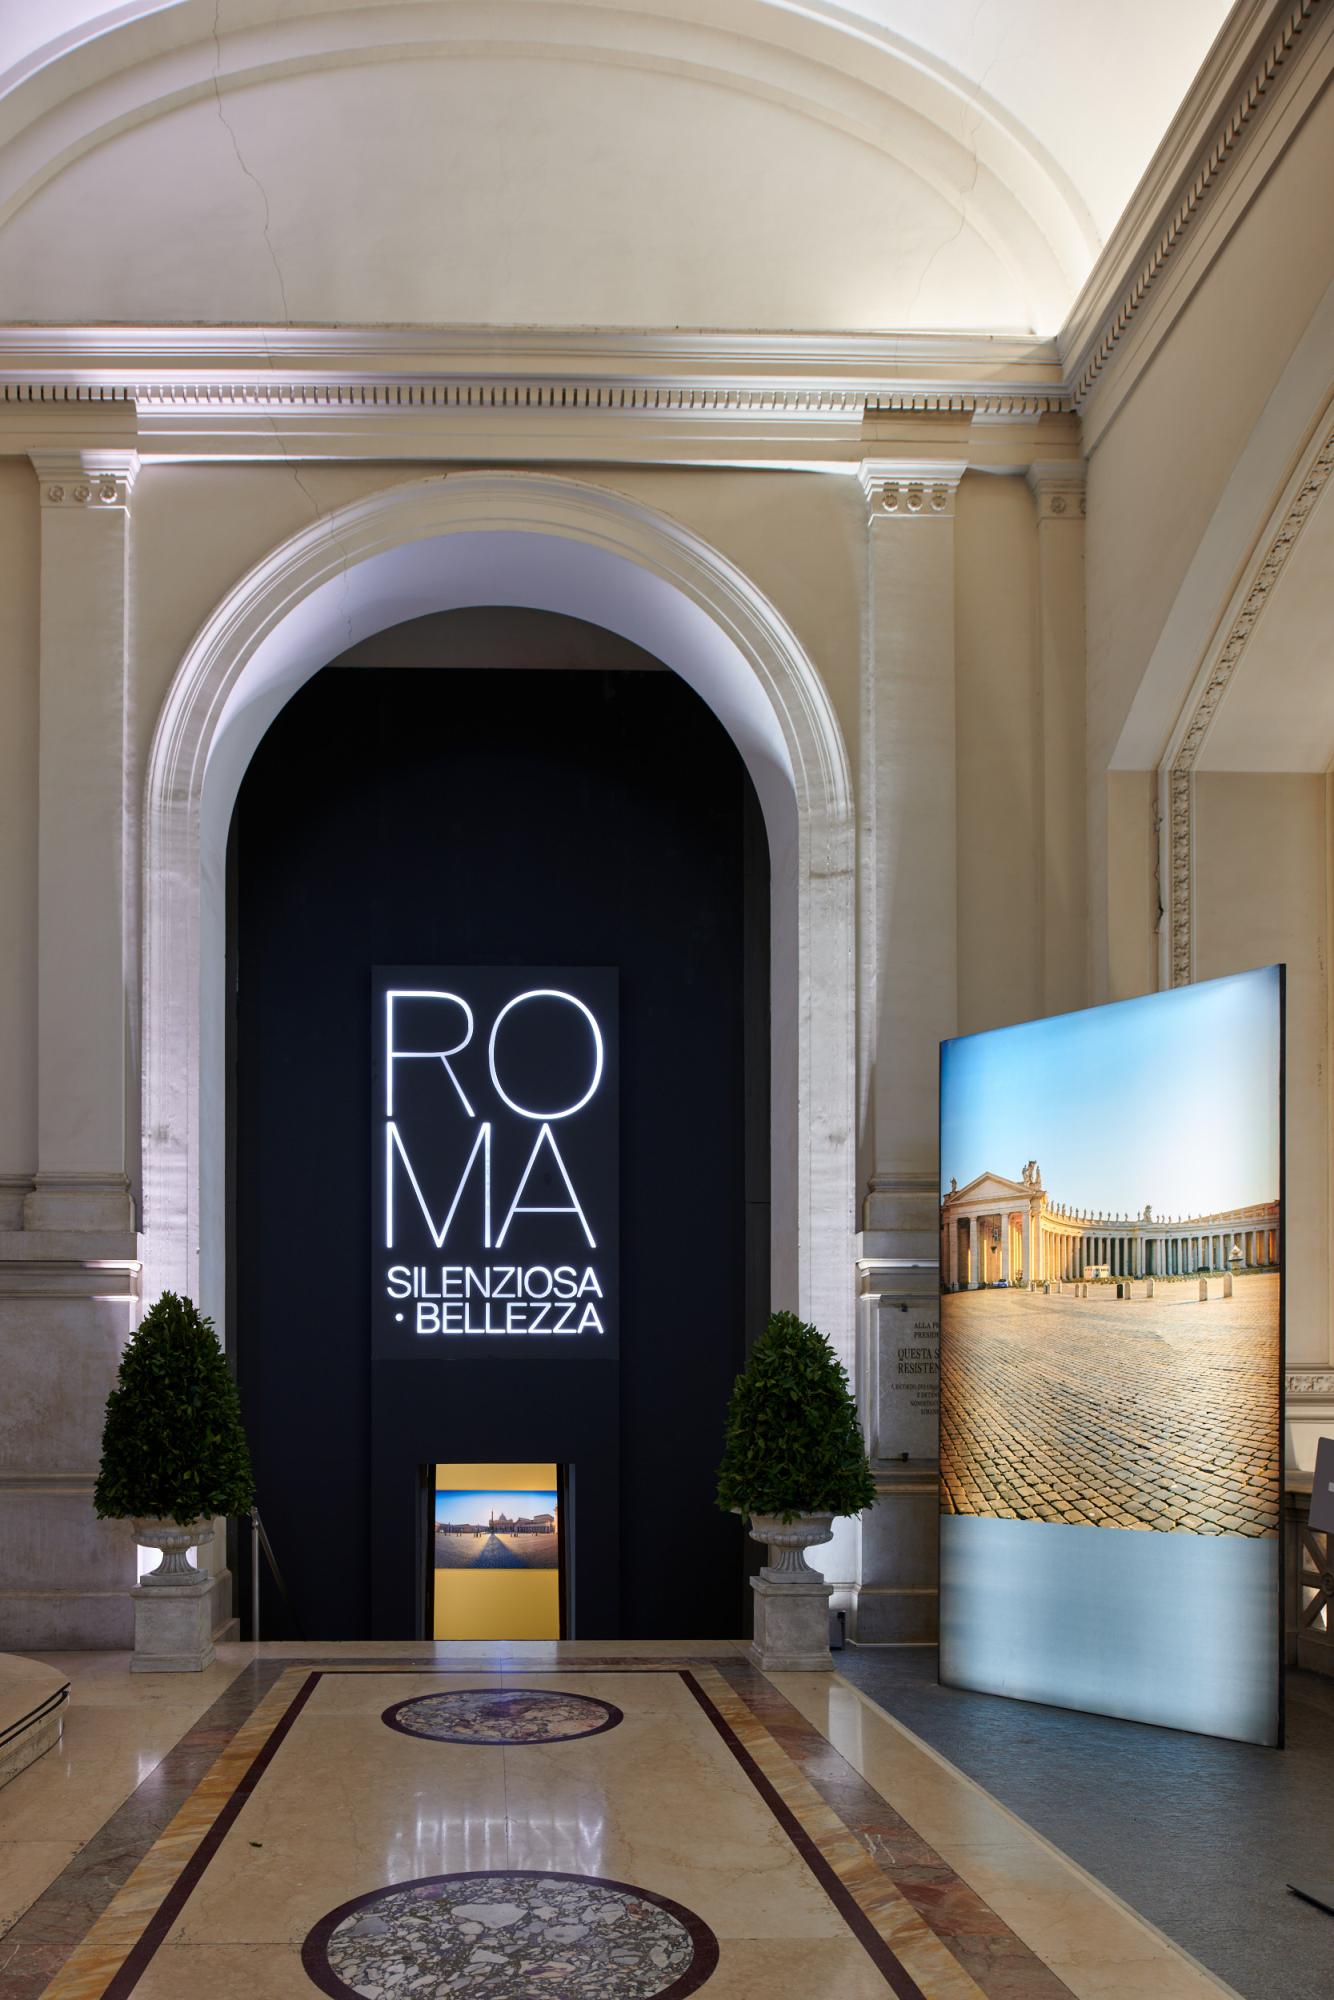 ROMA SILENZIOSA BELLEZZA exhibition has begun: 28,481 visitors to the Vittoriano in the first three days of opening.